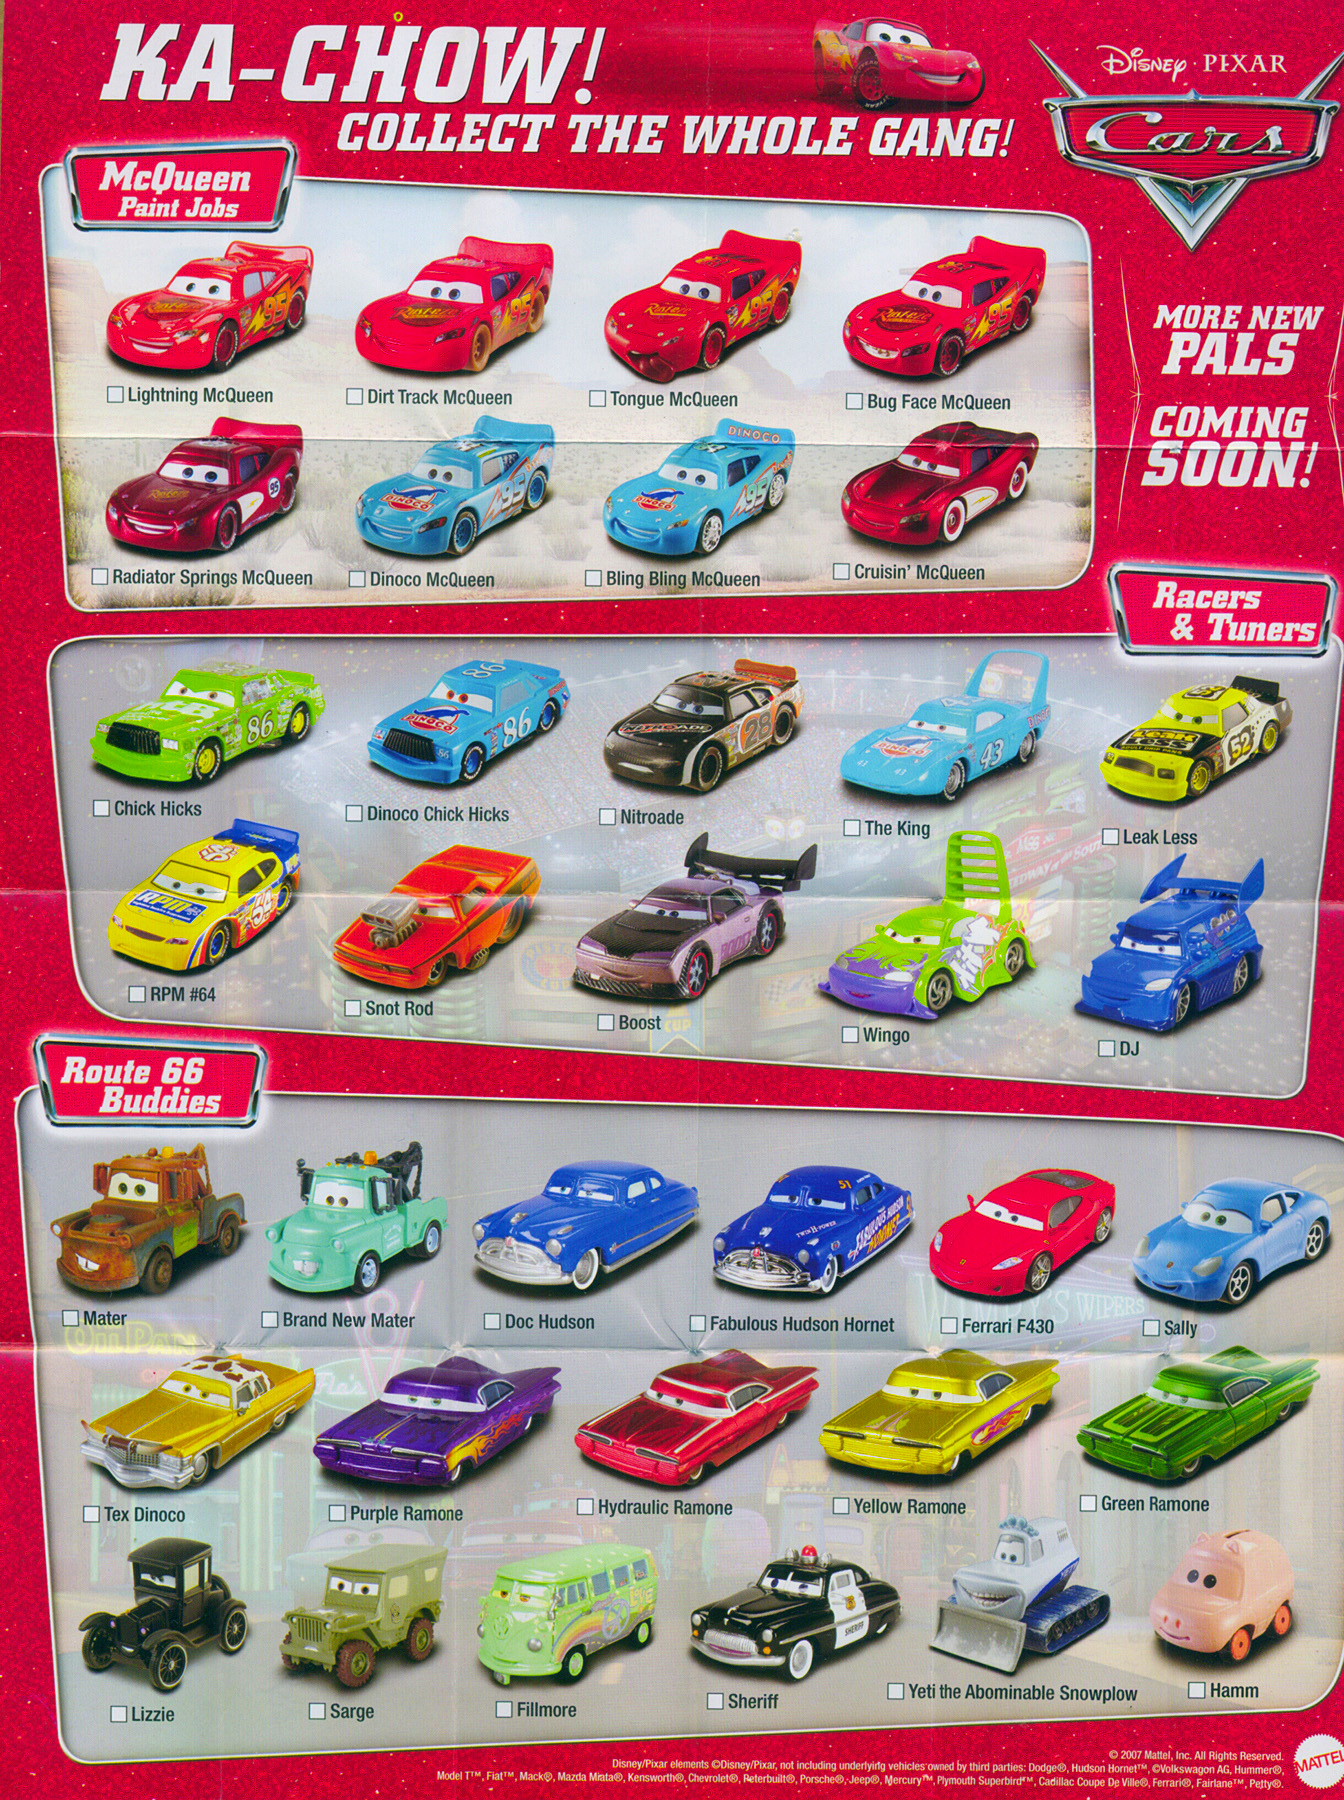 stil agitatie preambule Take Five a Day » Blog Archive » Mattel Disney Pixar Diecast CARS: Anything  You Can Collect, I Can Collect More … The Completist Check List